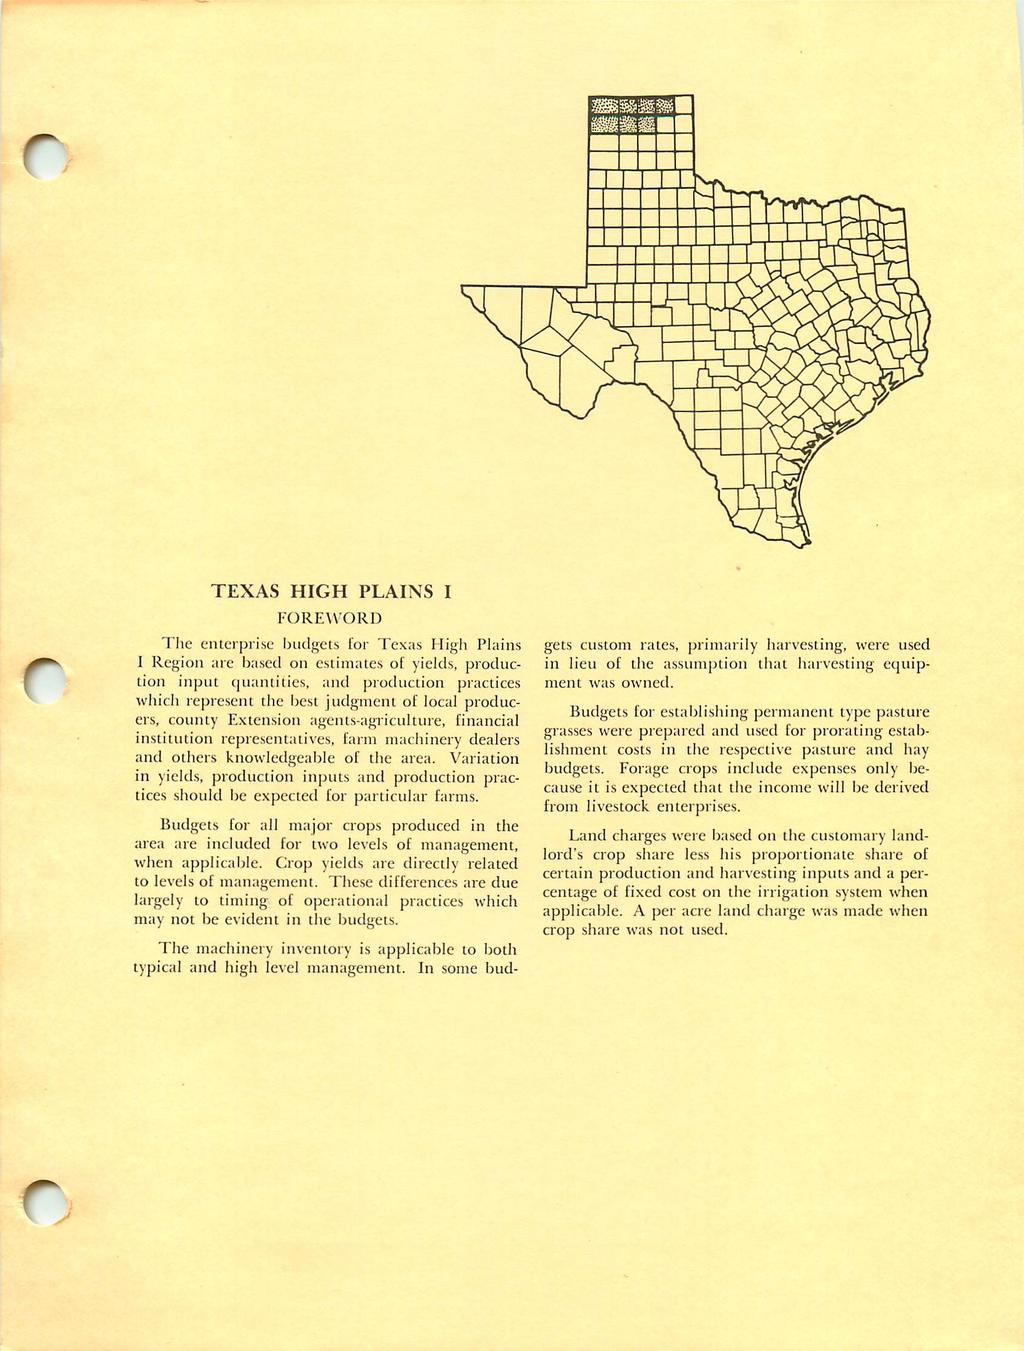 r TEXAS HIGH PLAINS I FOREWORD The enterprise budgets for Texas High Plains I Region arc based on estimates of yields, produc tion input quantities, and production practices which represent the best